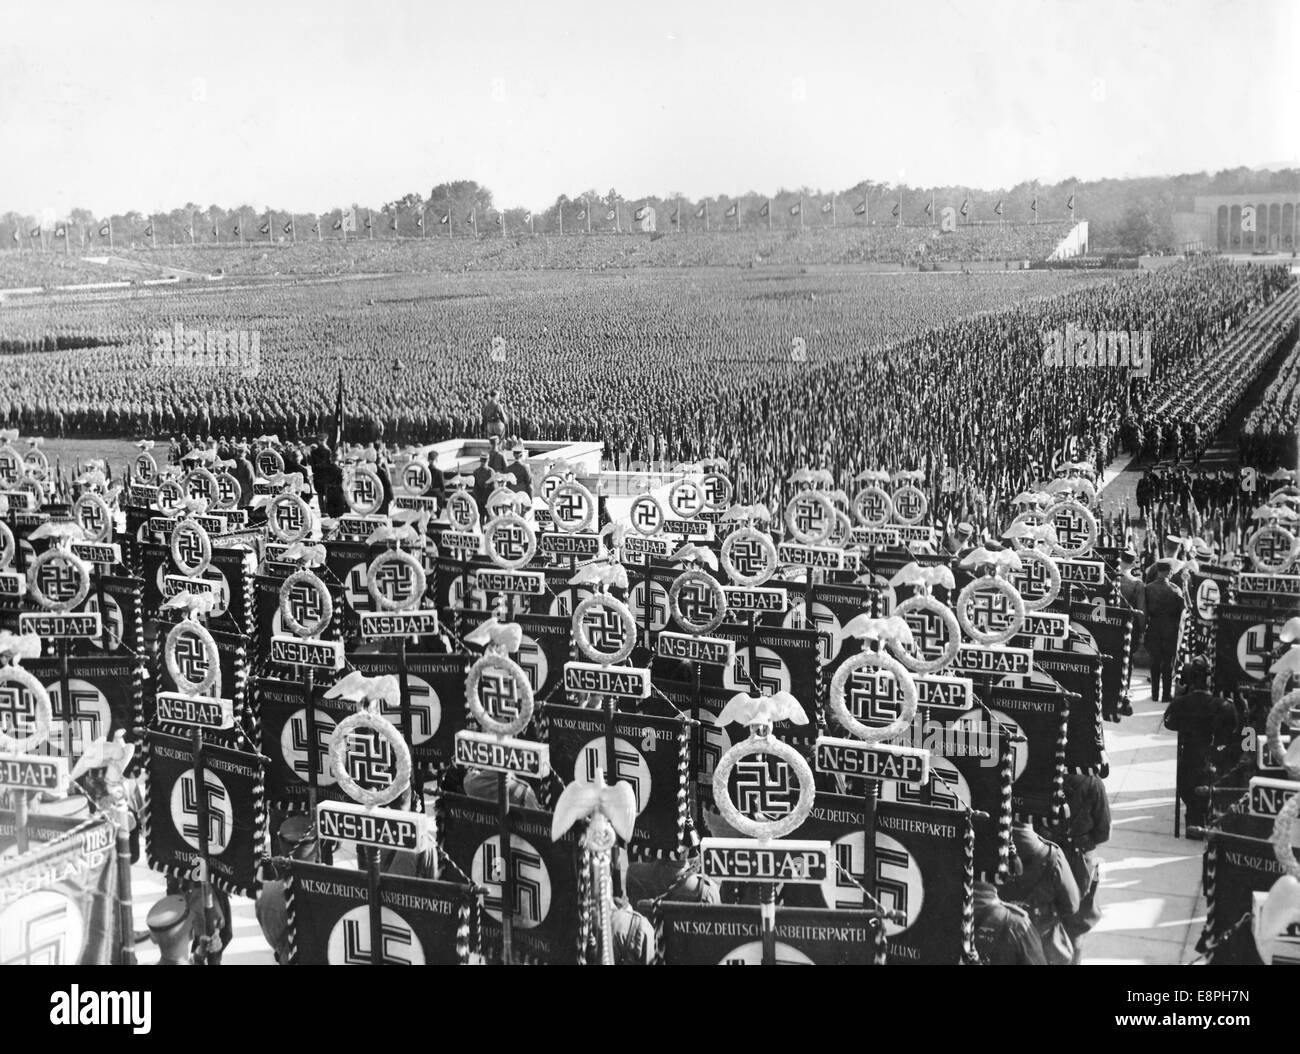 Nuremberg Rally 1936 in Nuremberg, Germany - Nazi party rally grounds - View of the formations of Sturmtruppe (SA), Schutzstaffel (SS) and National Socialist Motor Corps (NSKK). Adolf Hitler stands on the speaker's platform. (Flaws in quality due to the historic picture copy) Fotoarchiv für Zeitgeschichtee - NO WIRE SERVICE - Stock Photo